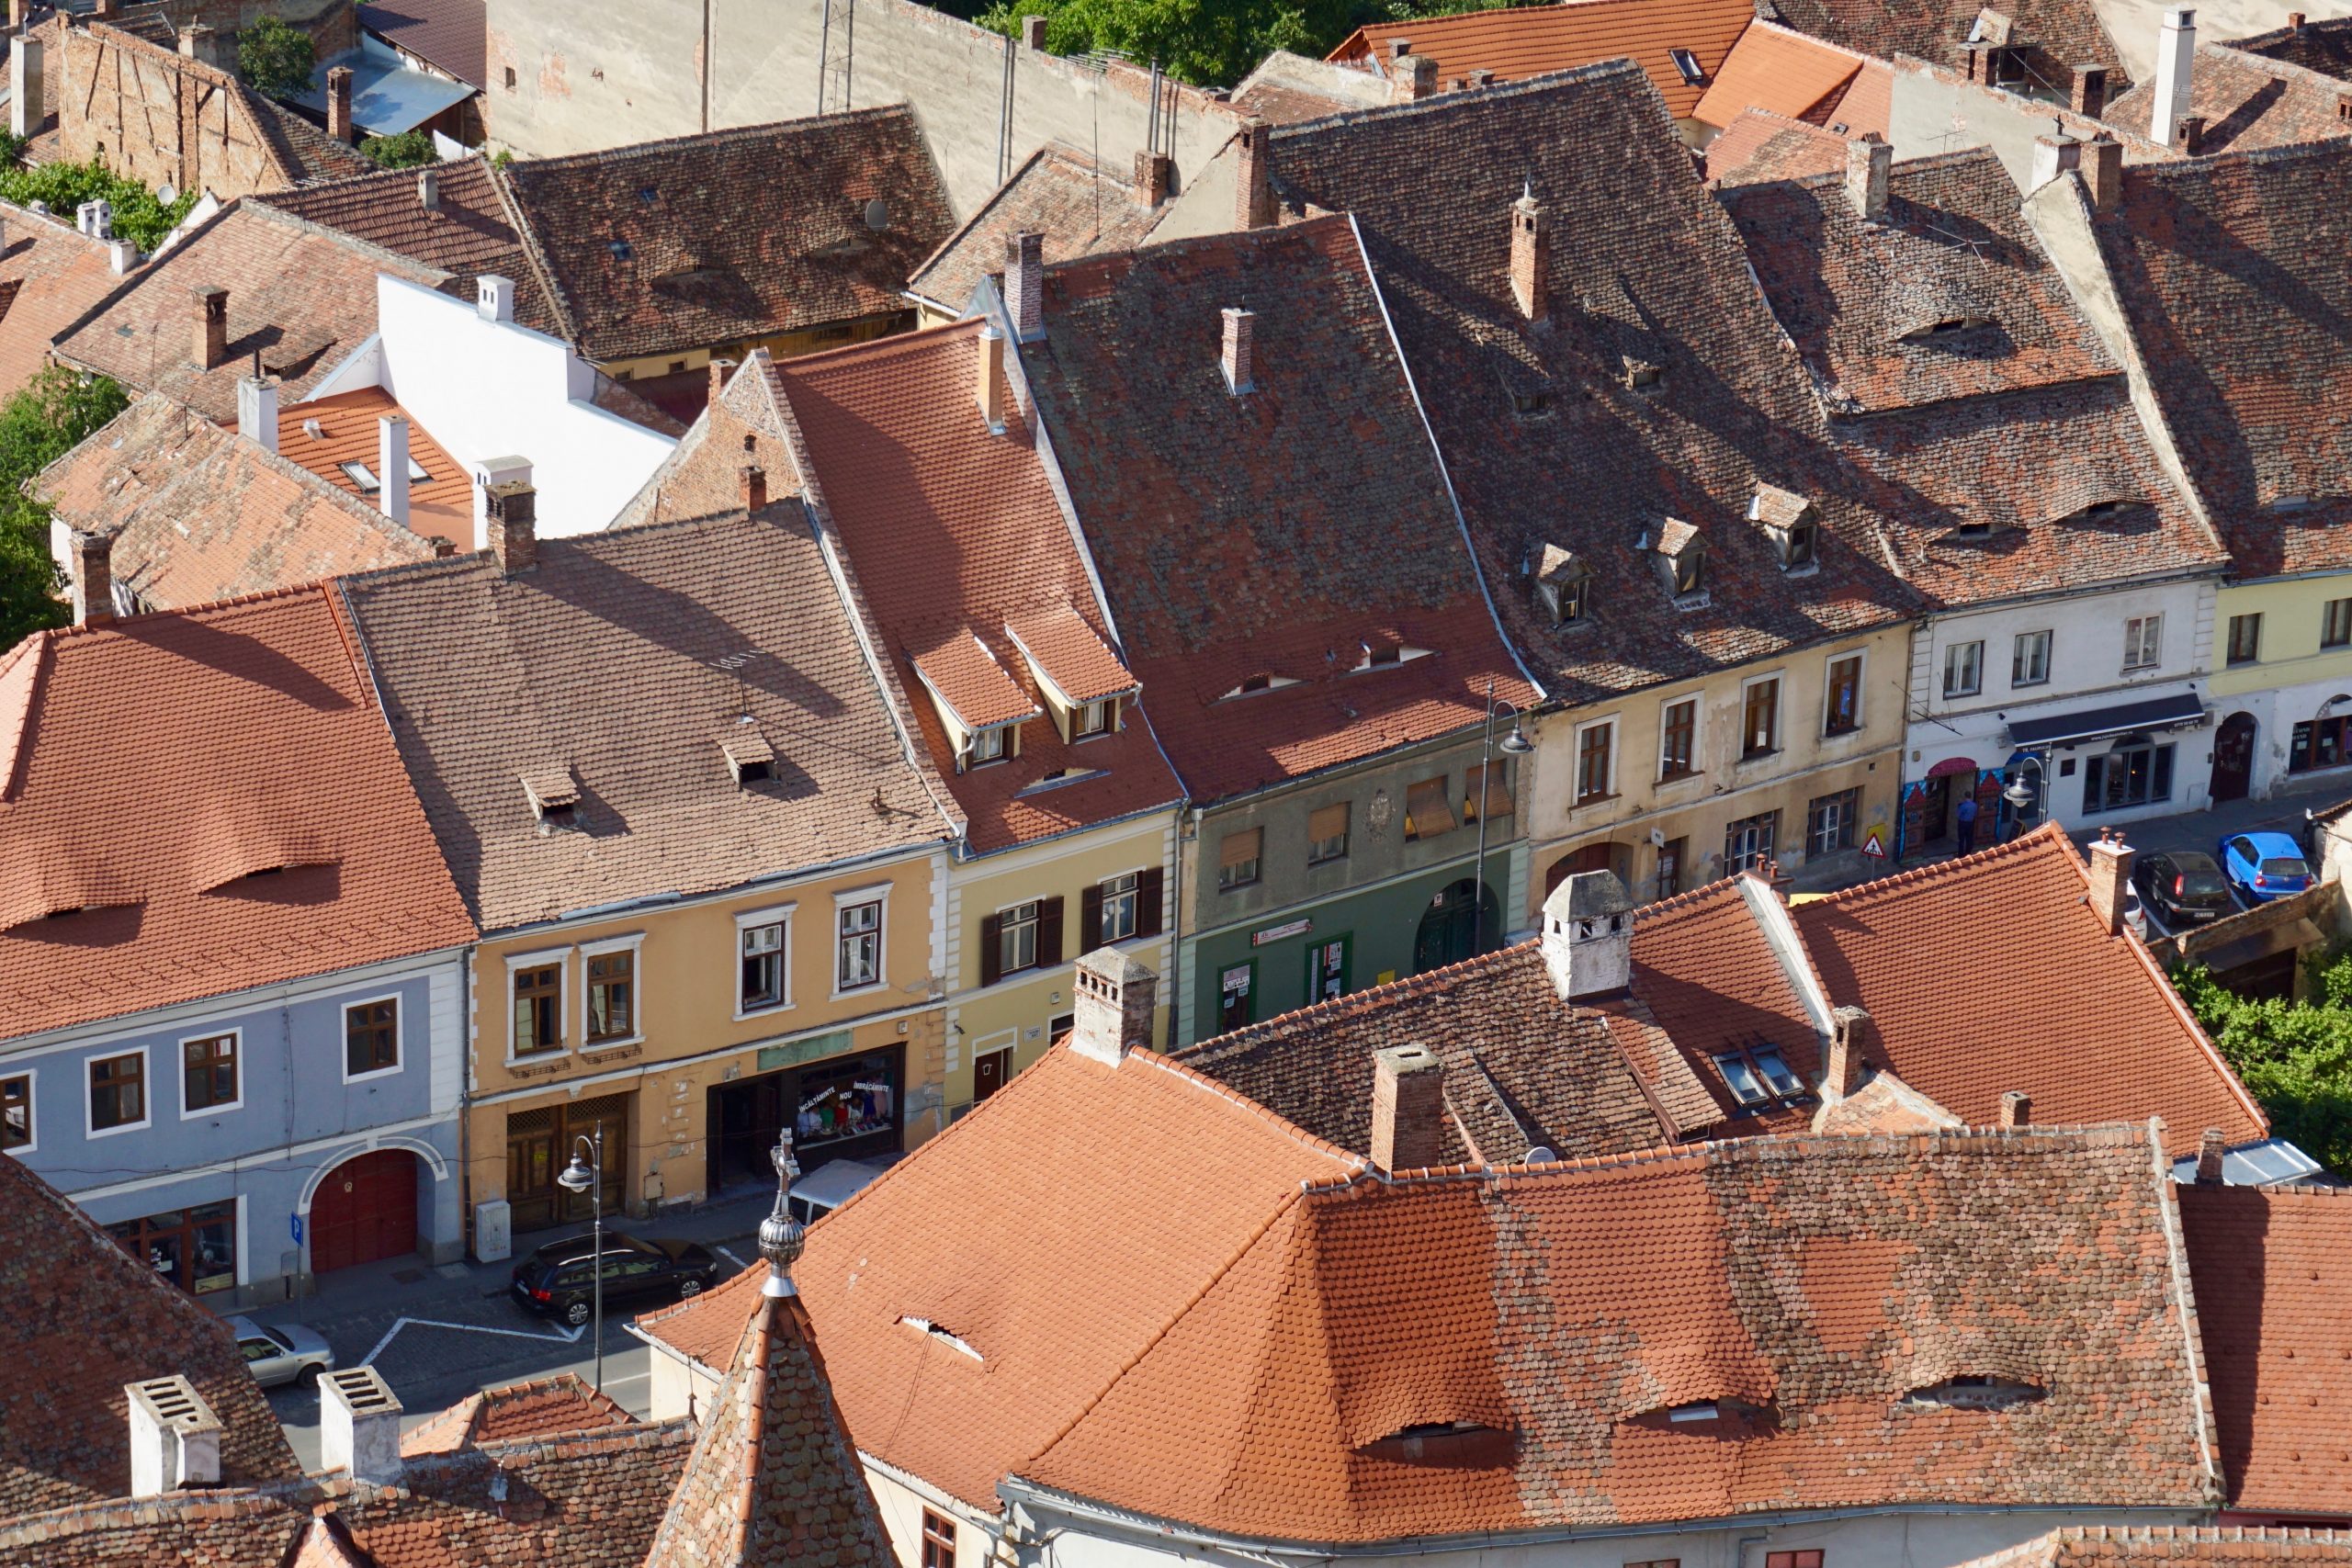 Rooftops in Sibiu - the city with eyes in Romania